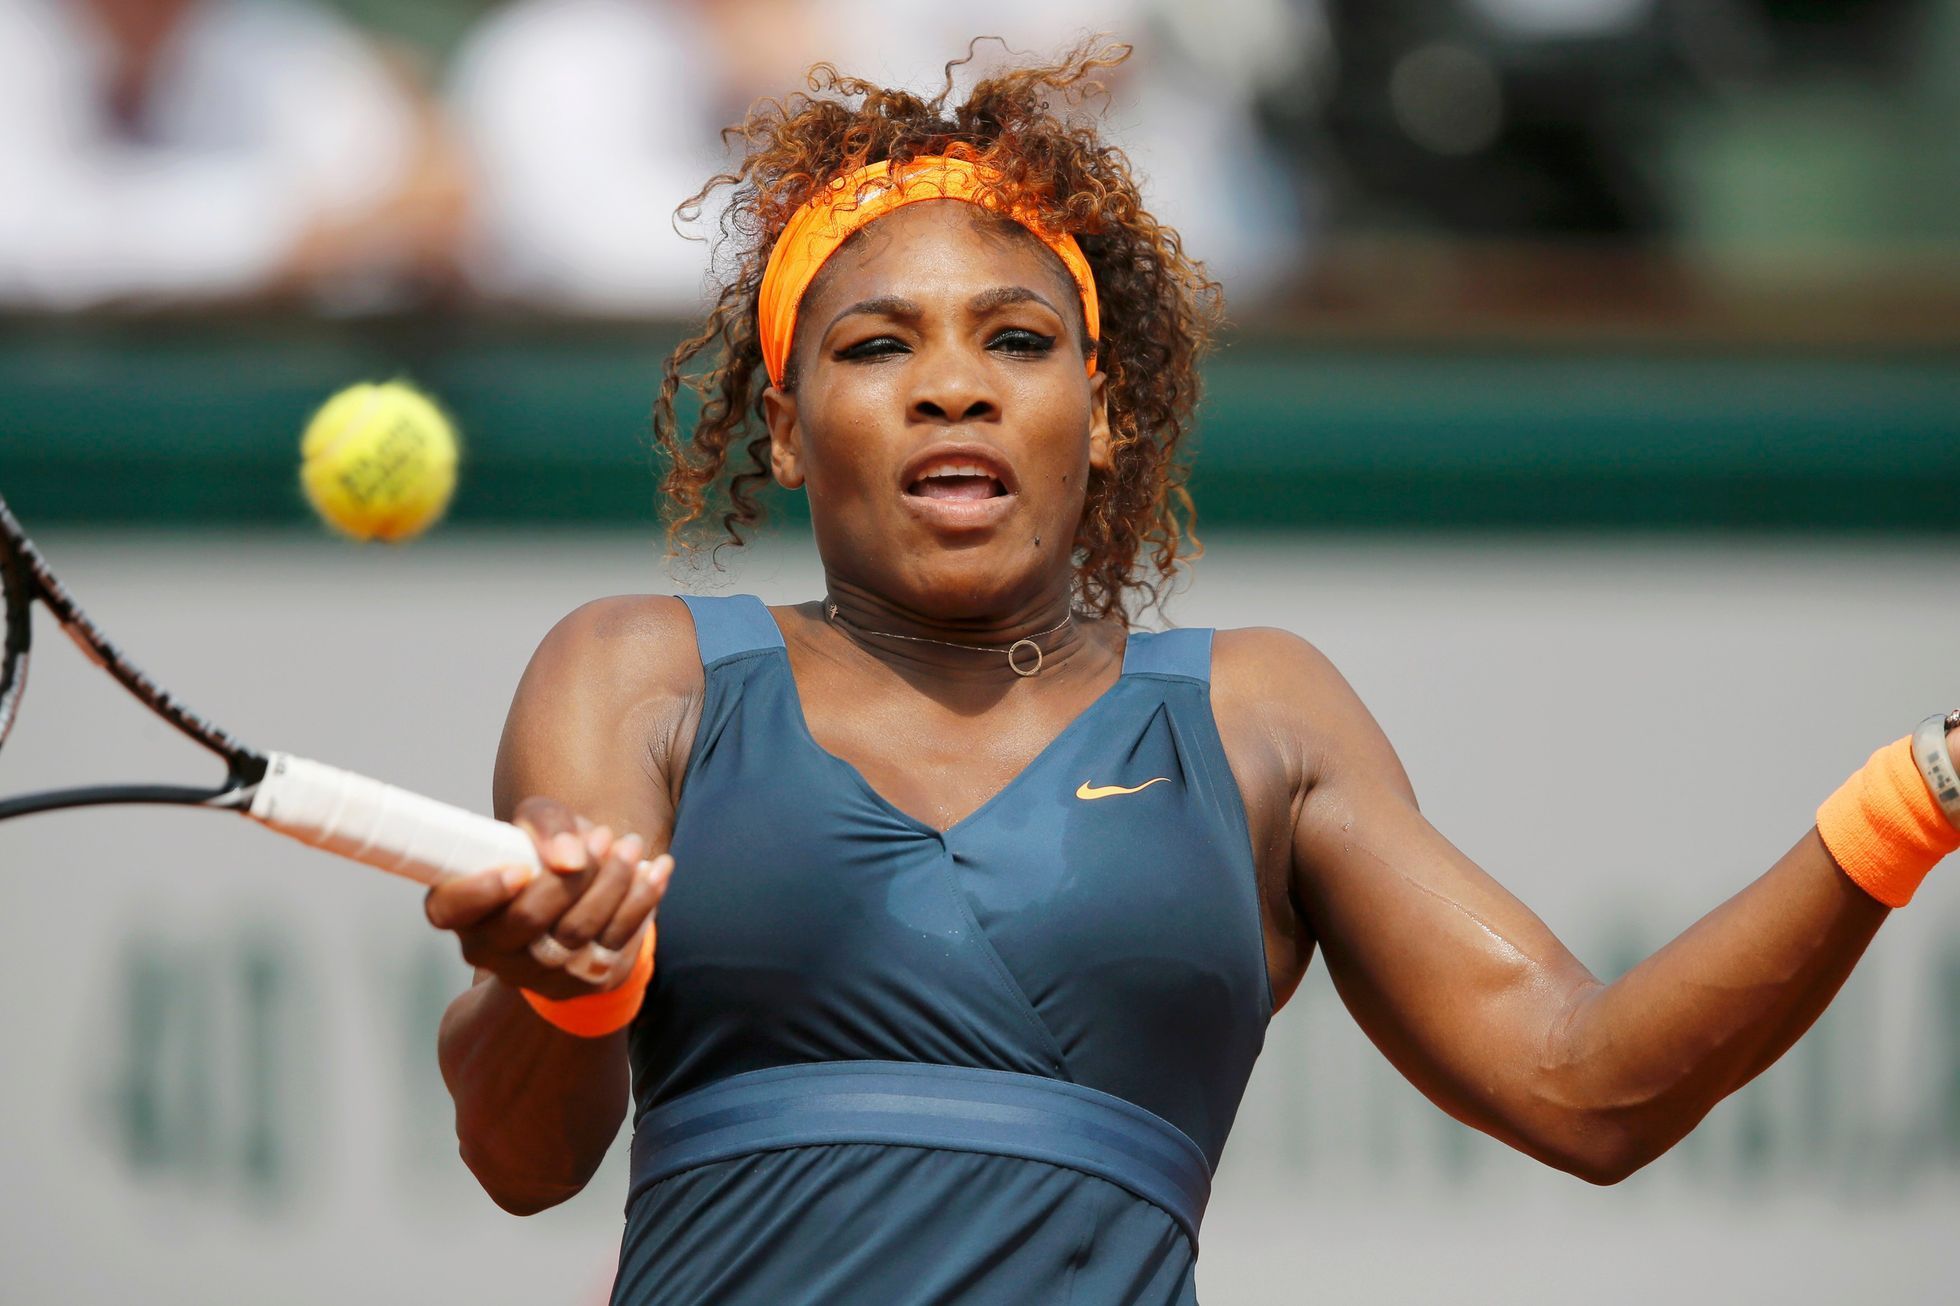 Tenis, French Open: Serena Williamsová